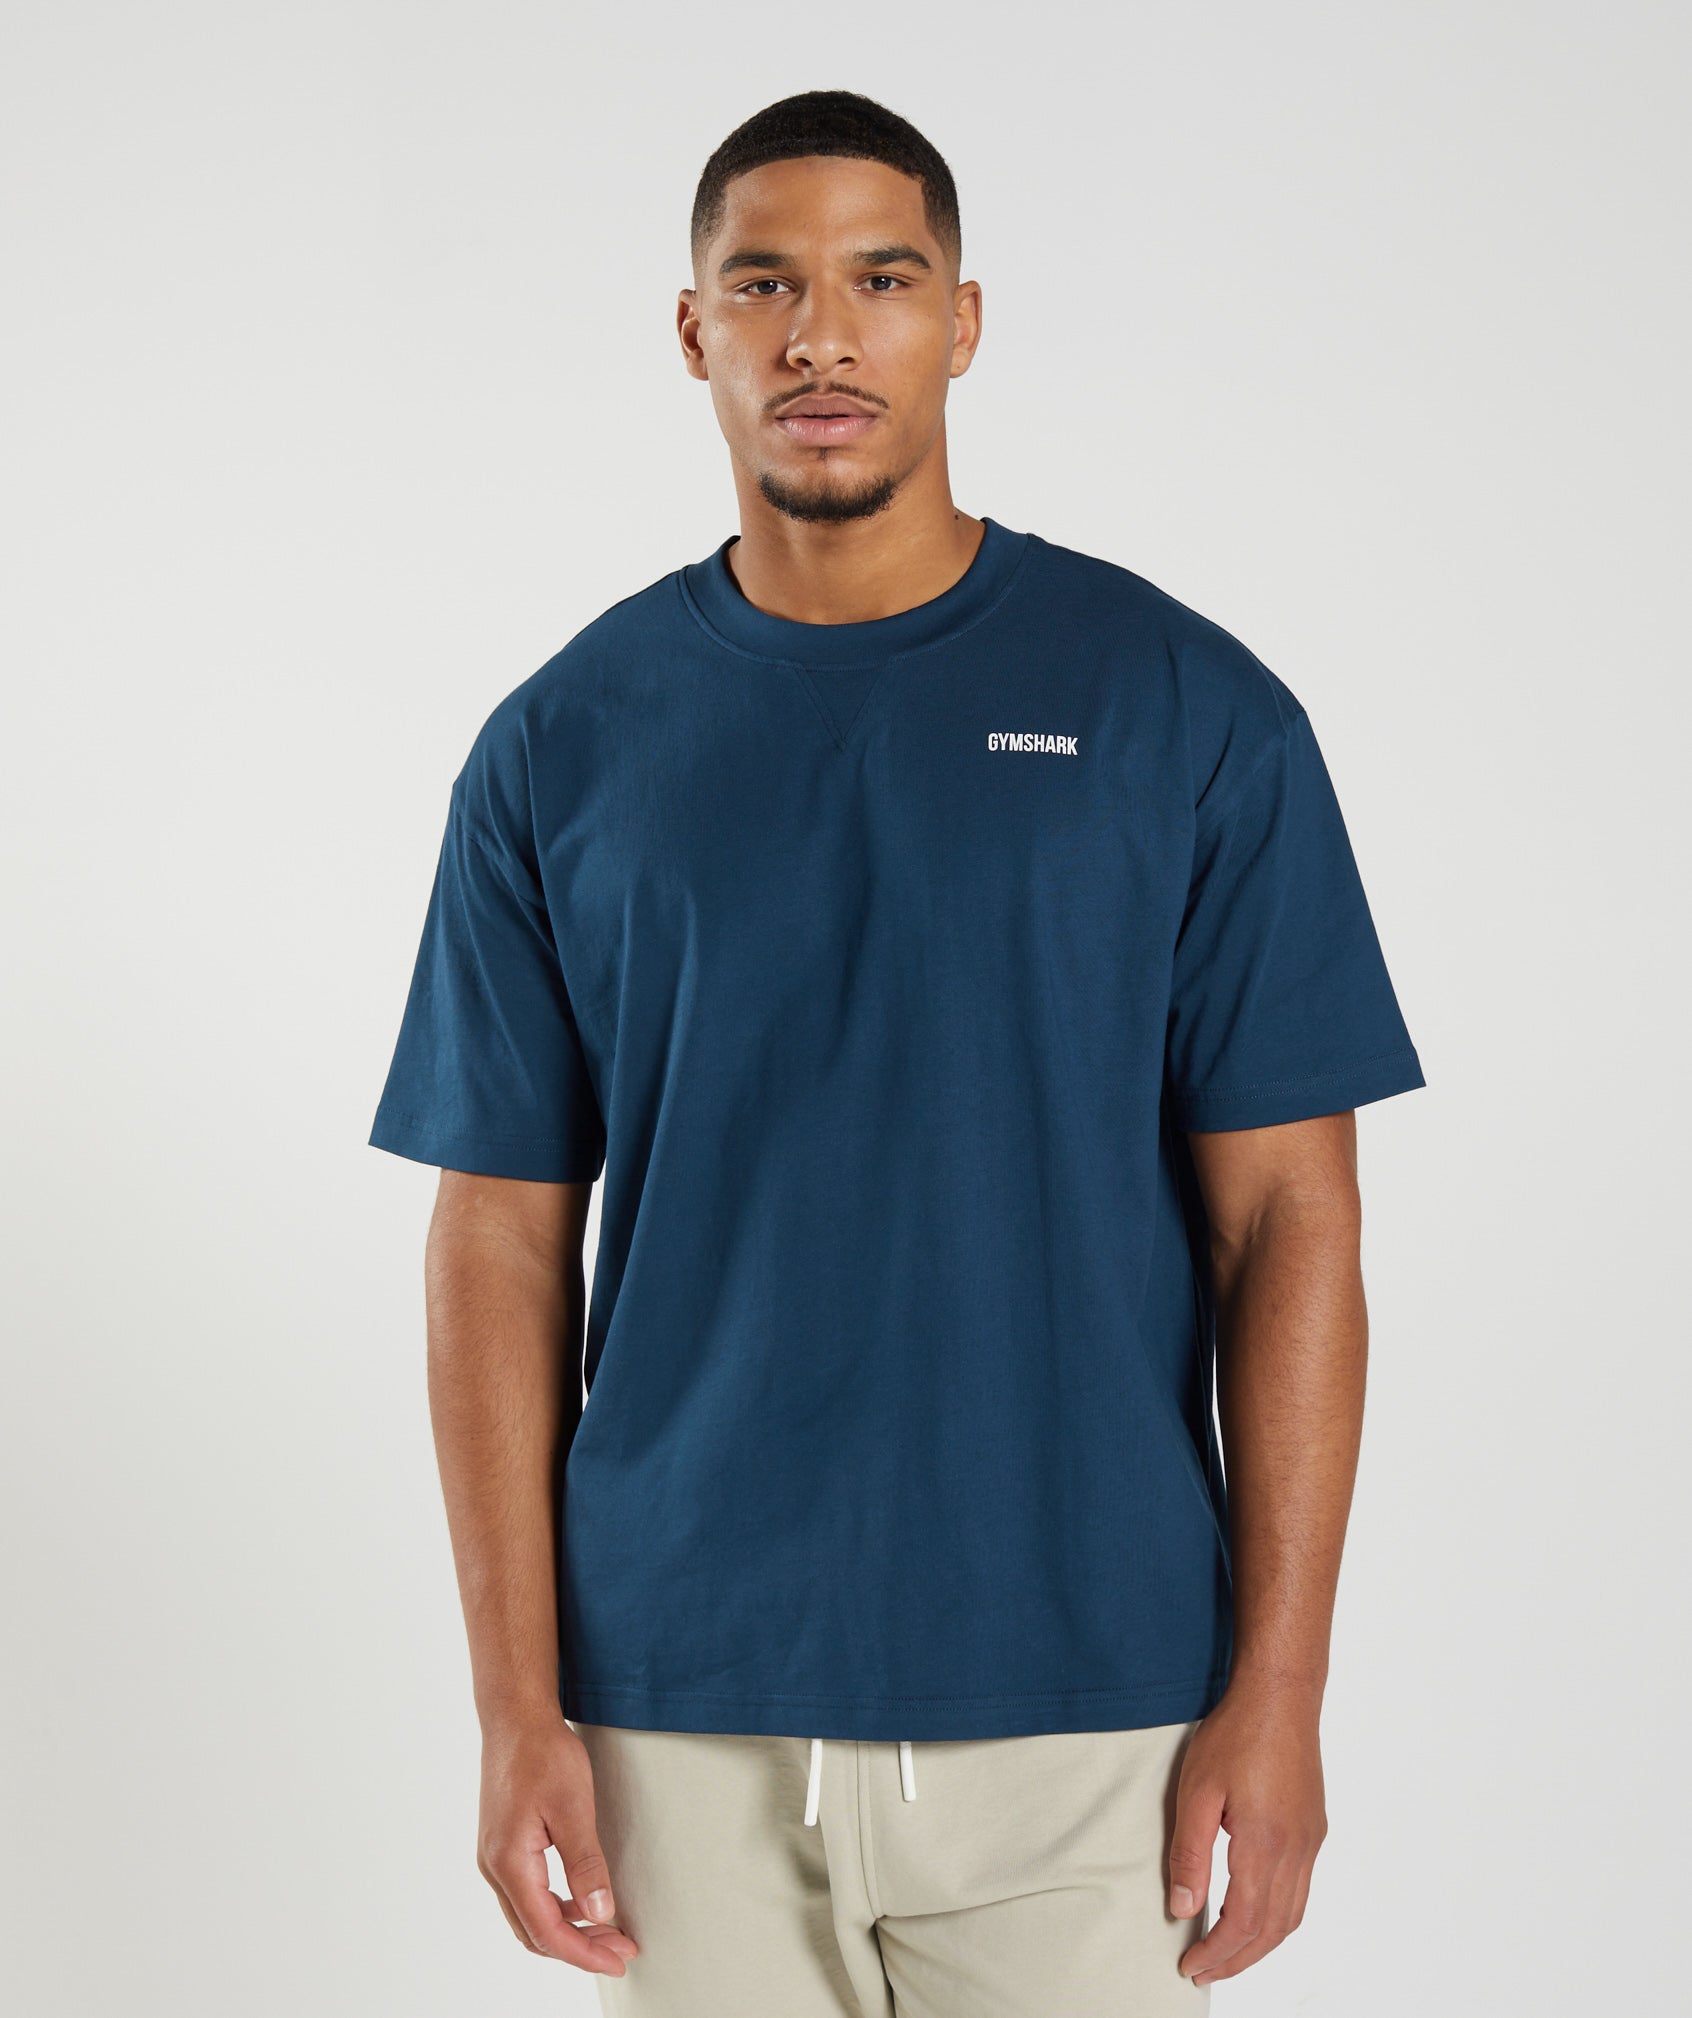 Rest Day Sweats T-Shirt in Navy - view 2